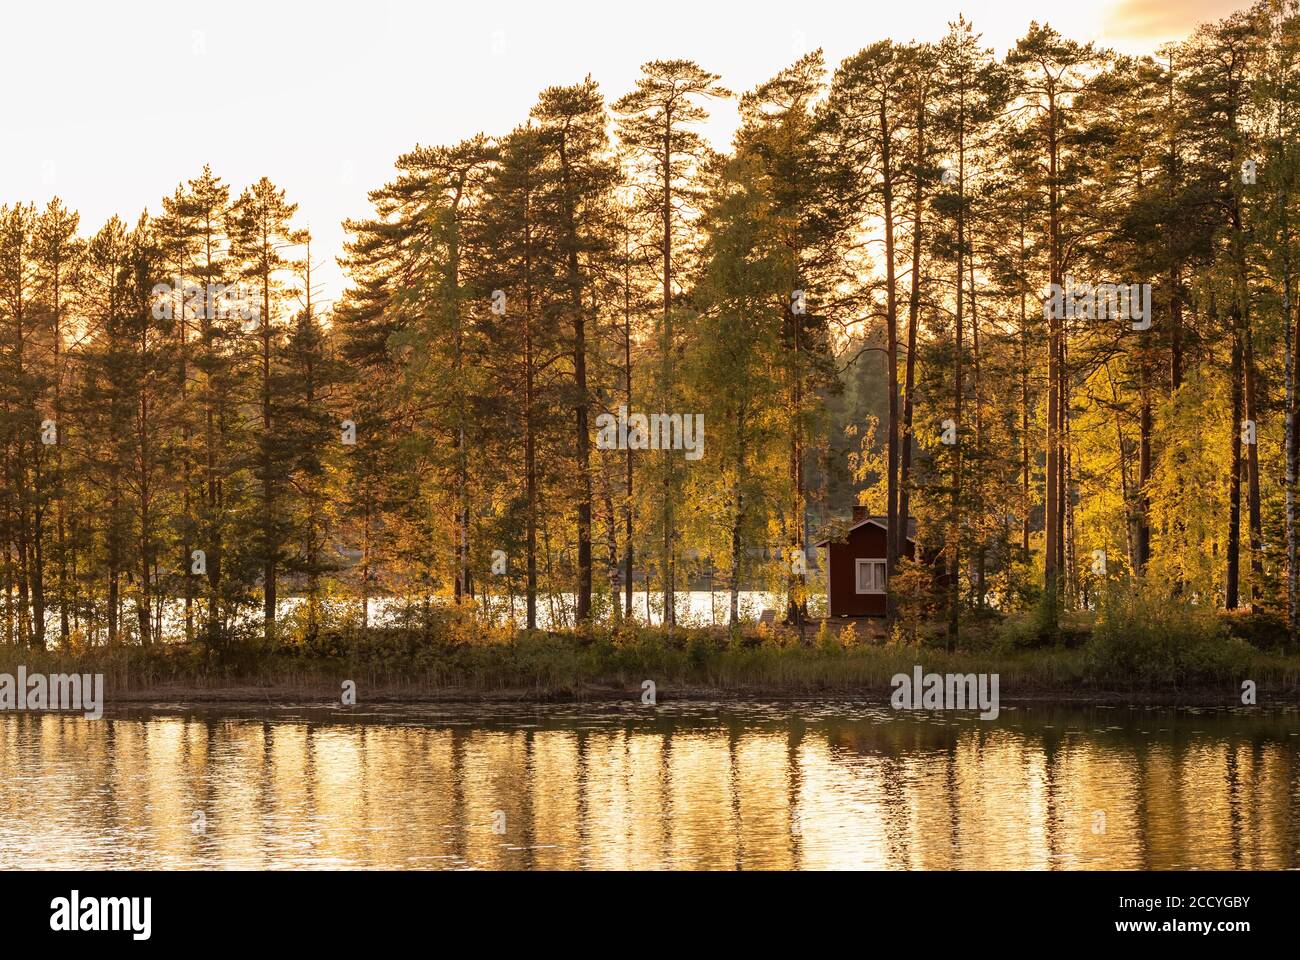 Small island on the lake with a country house in Finland. Stock Photo